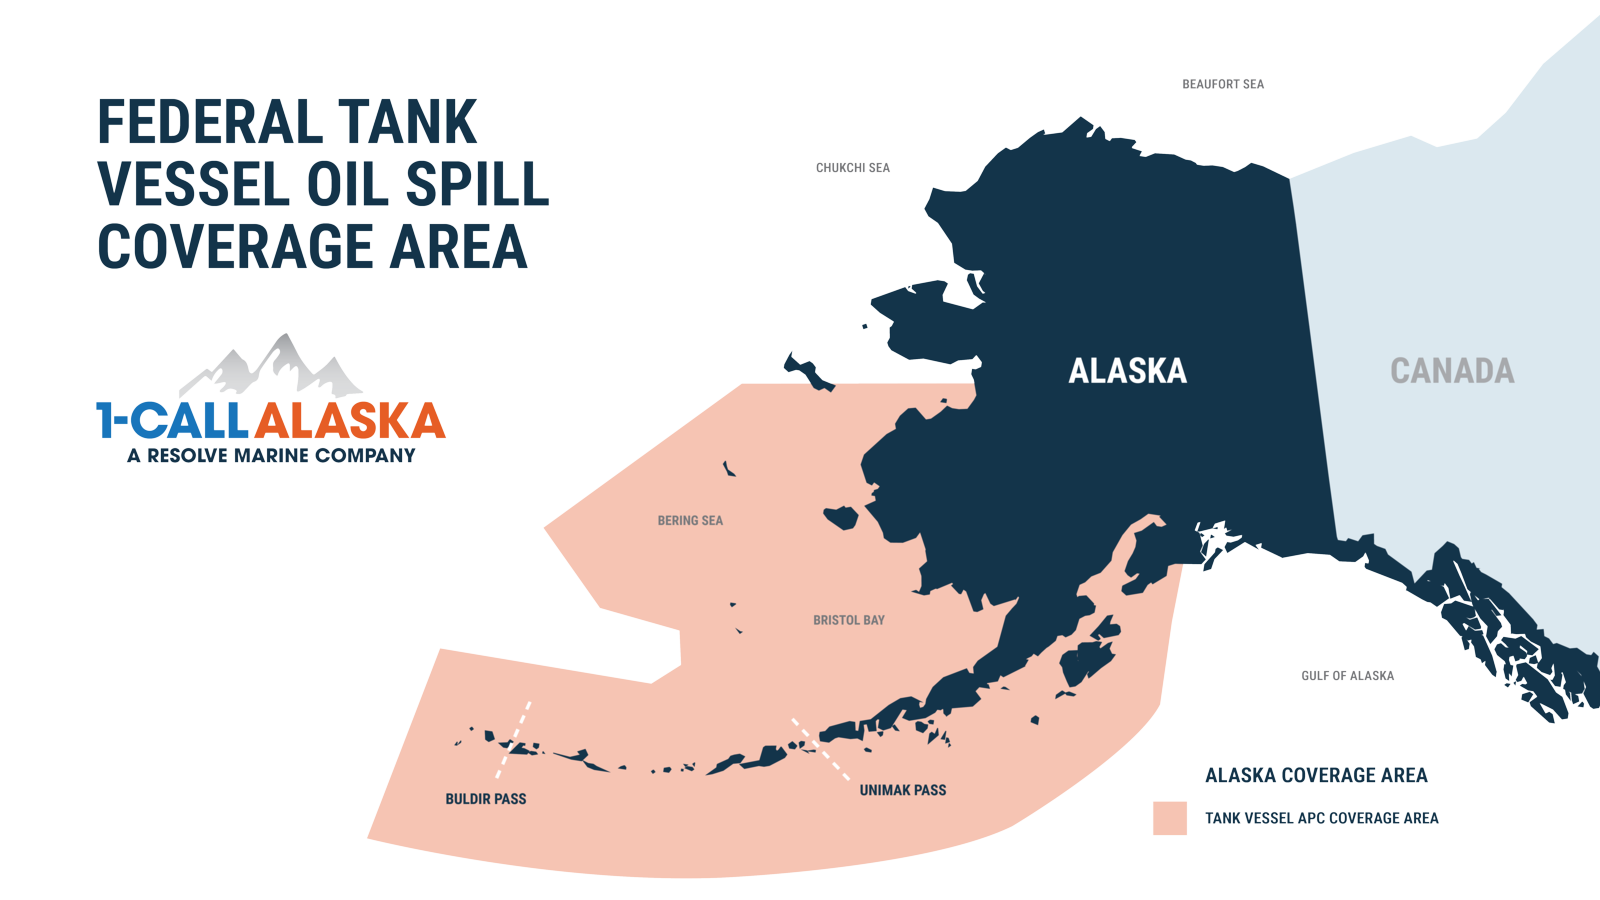 Map of Alaska showing the federal tank vessel oil spill coverage area